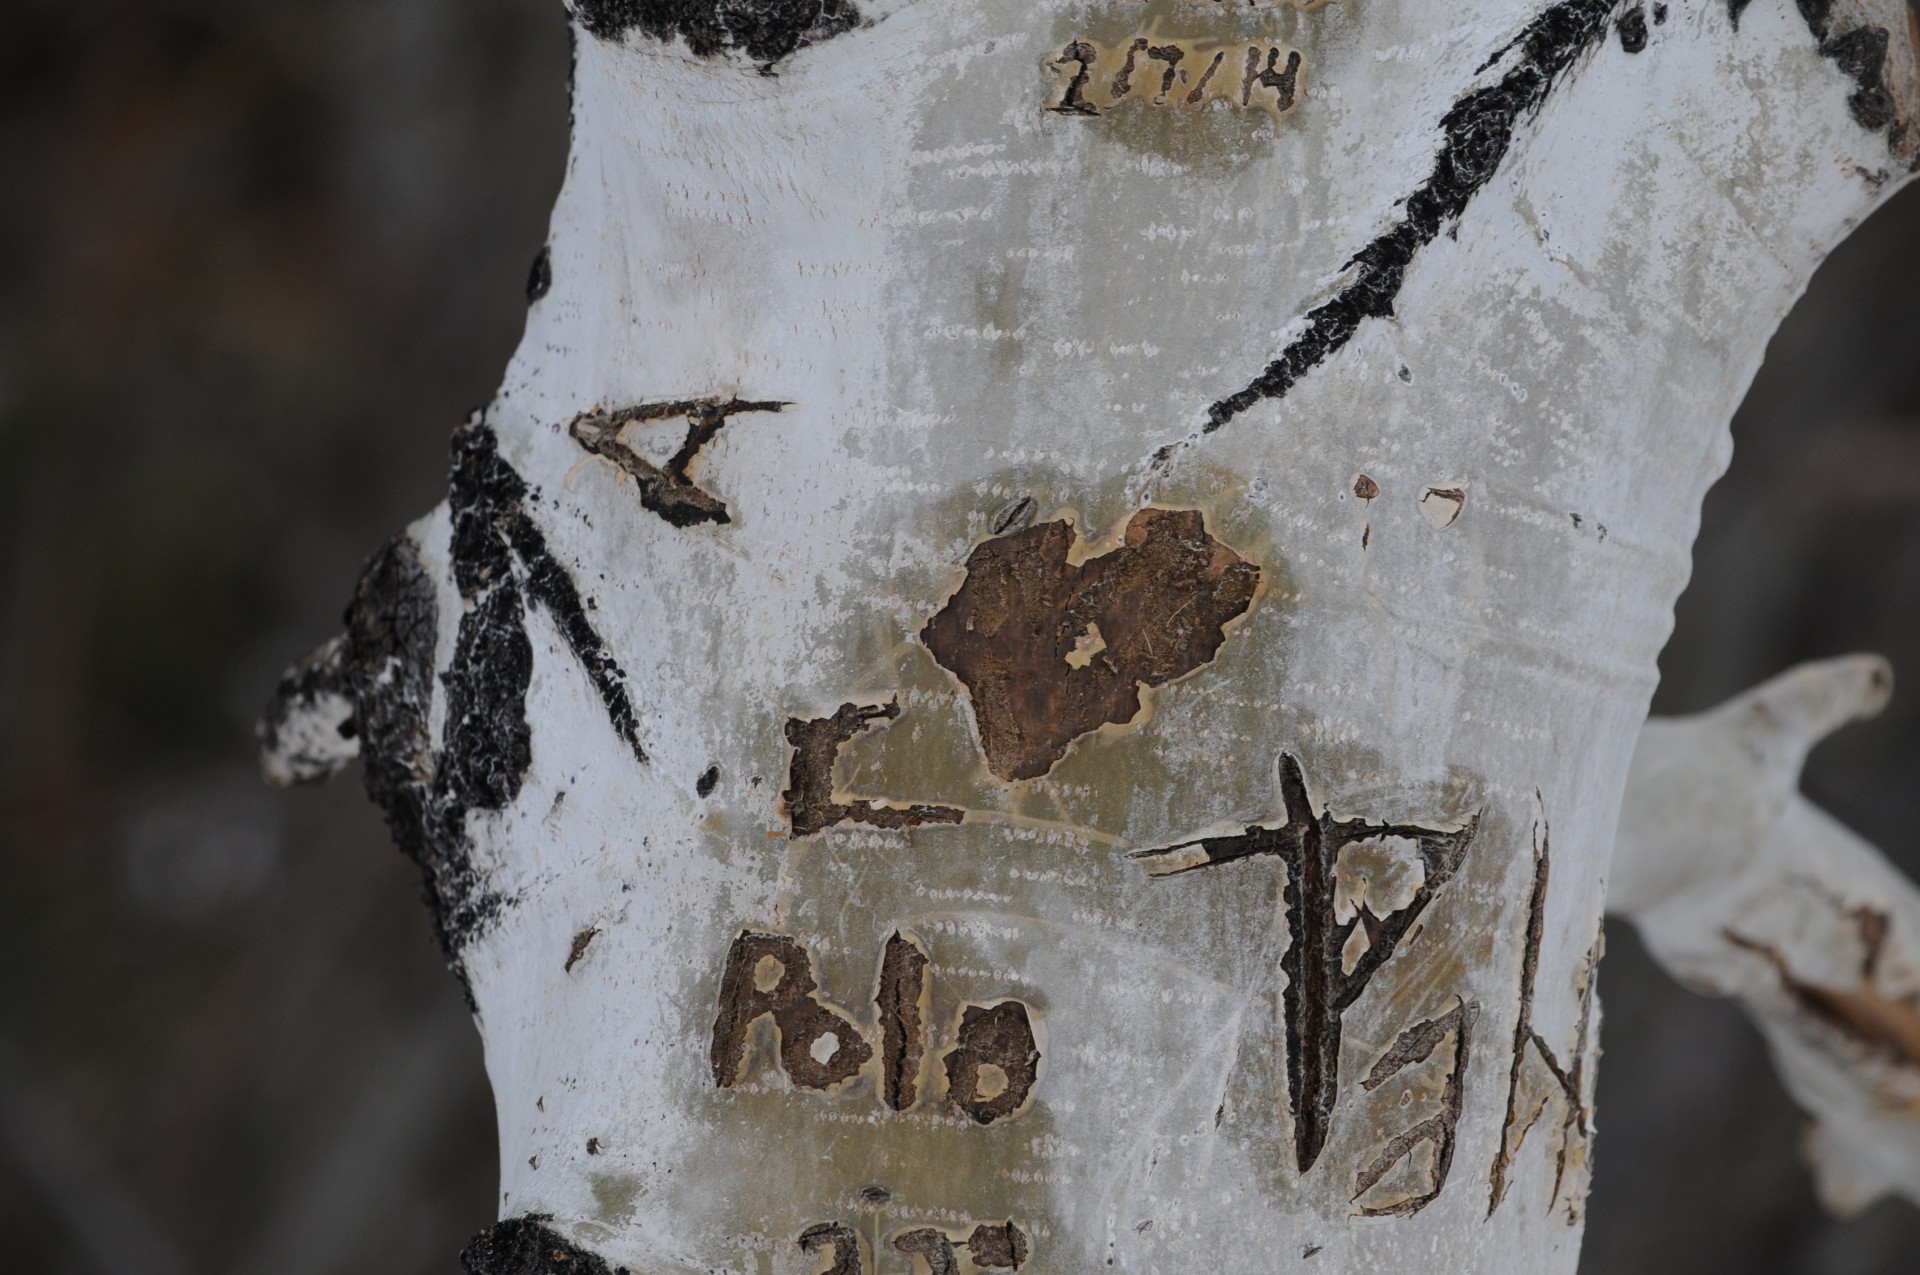 Close-up of proclaimed love carved in a tree trunk